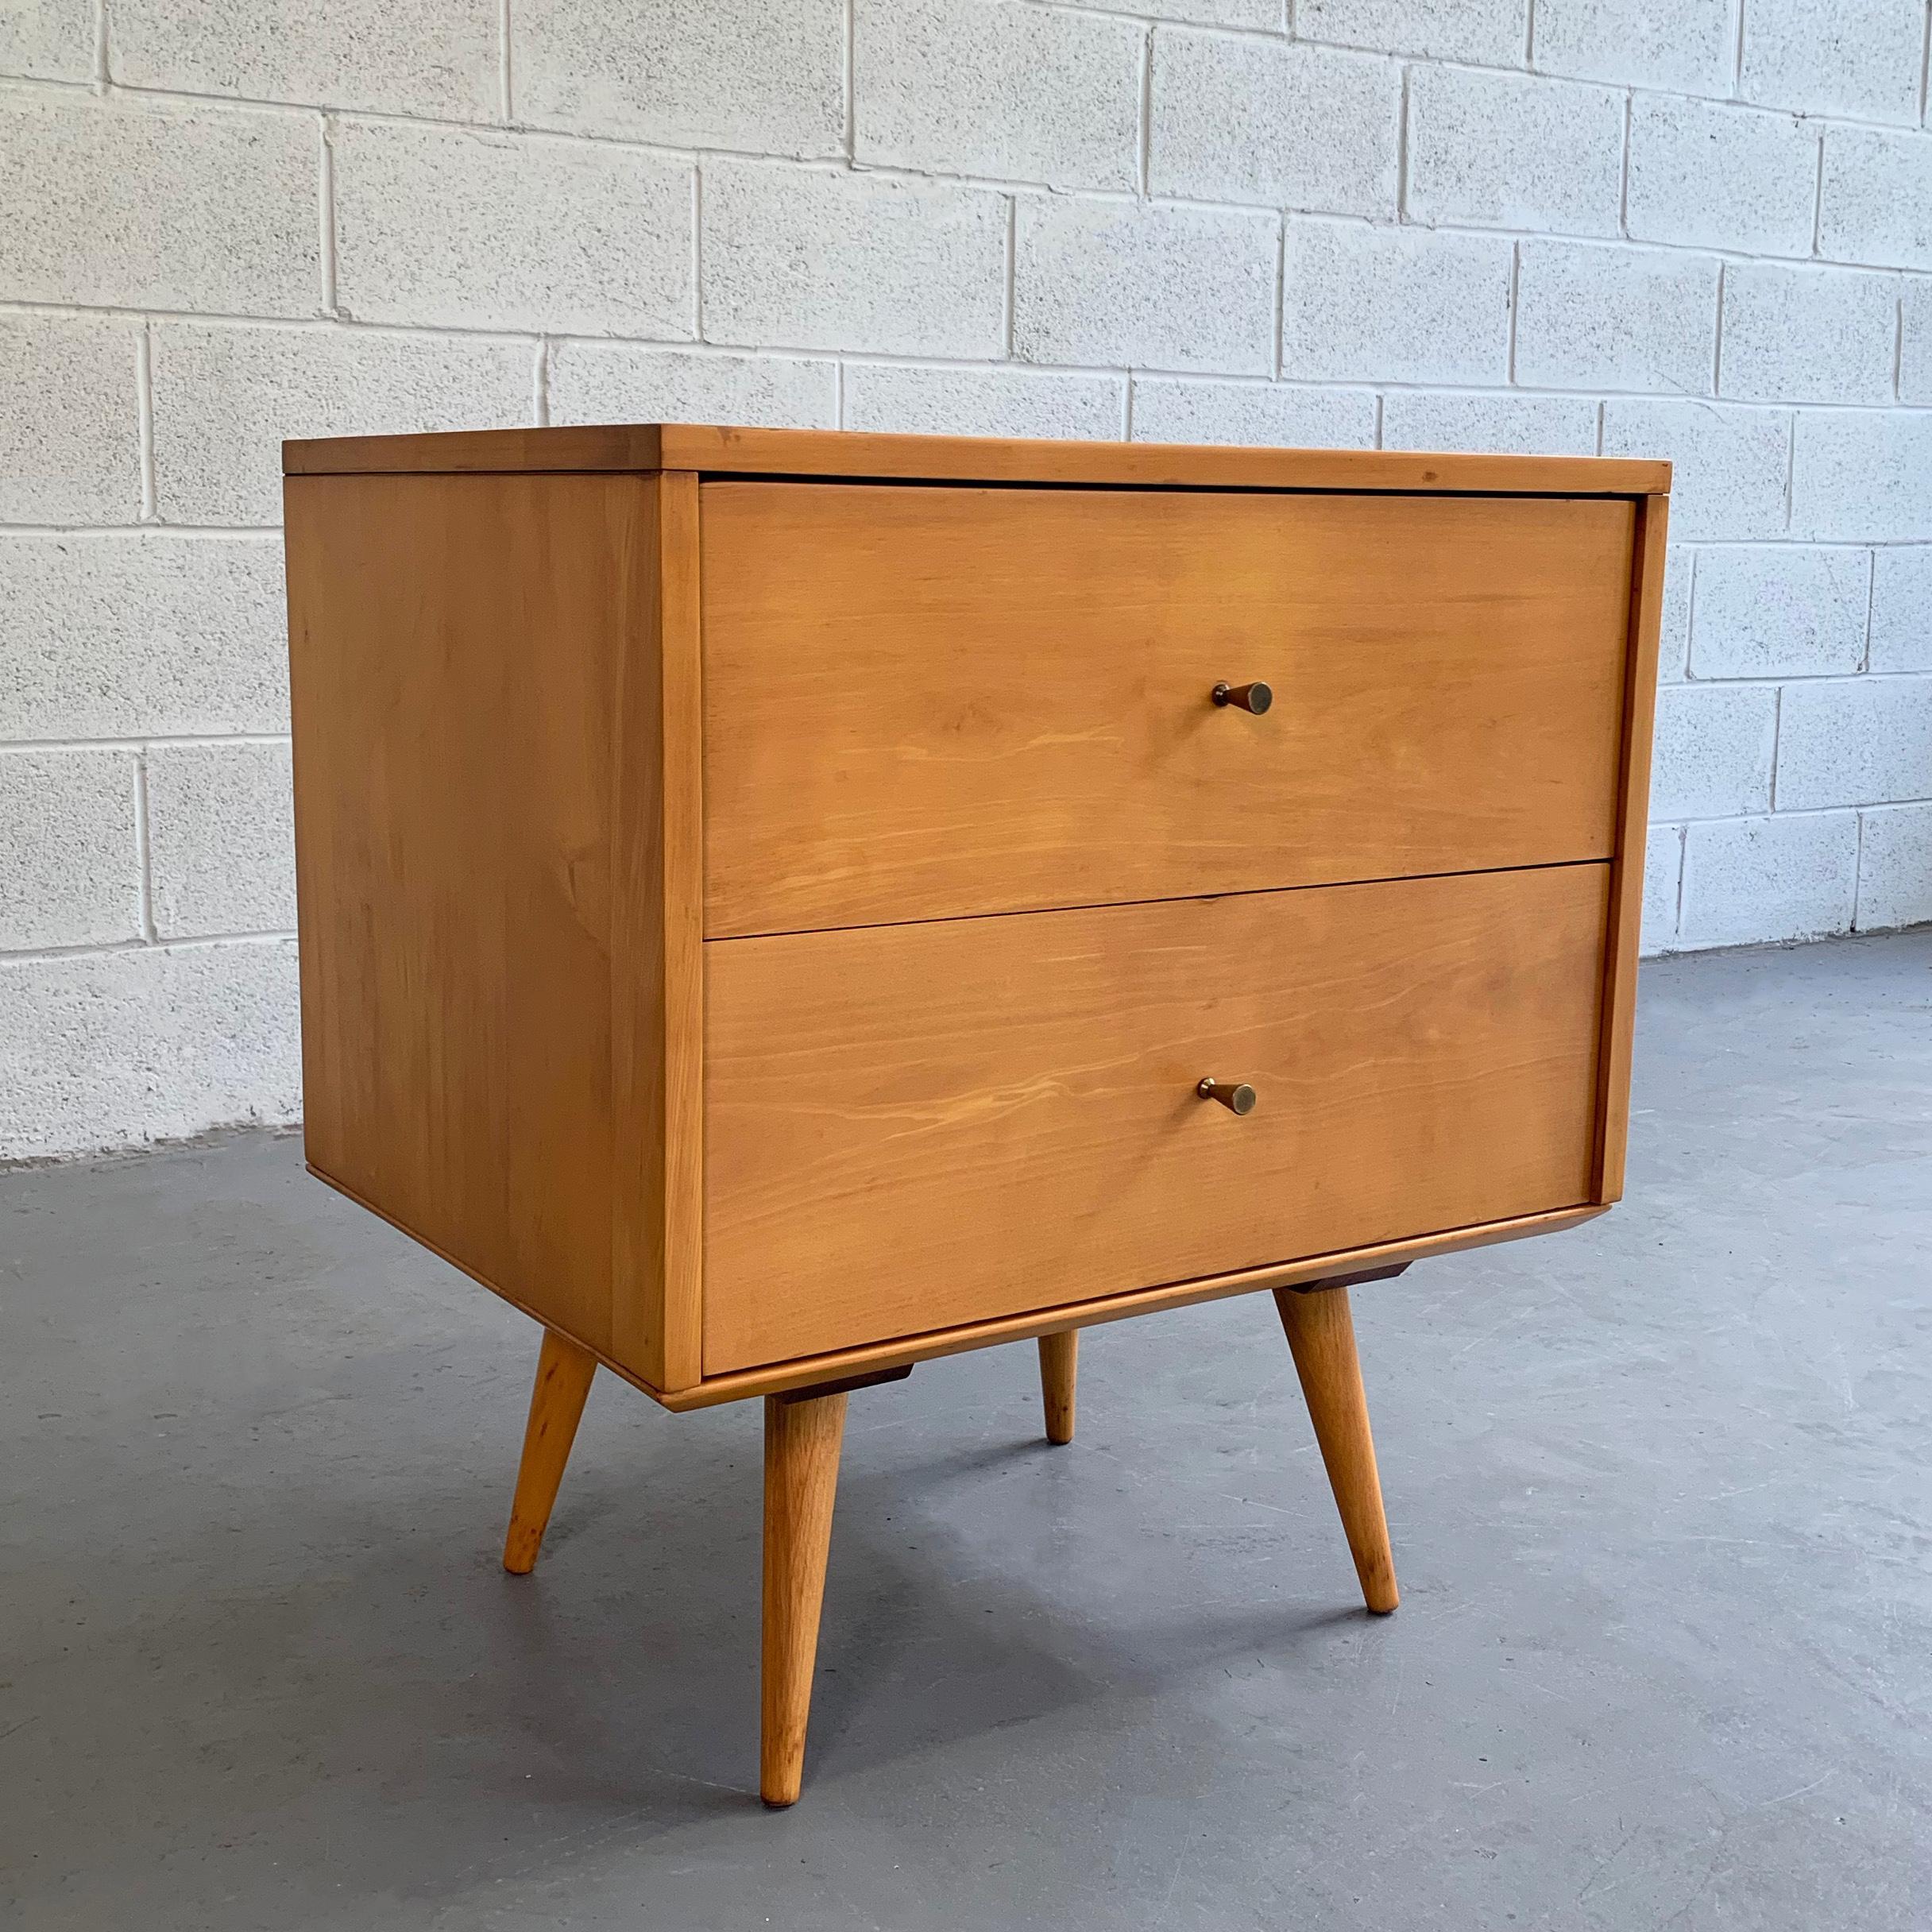 Petite, natural maple, side dresser by Paul McCobb, Planner Group for Winchendon features 2 drawers with signature McCobb brass hourglass pulls.